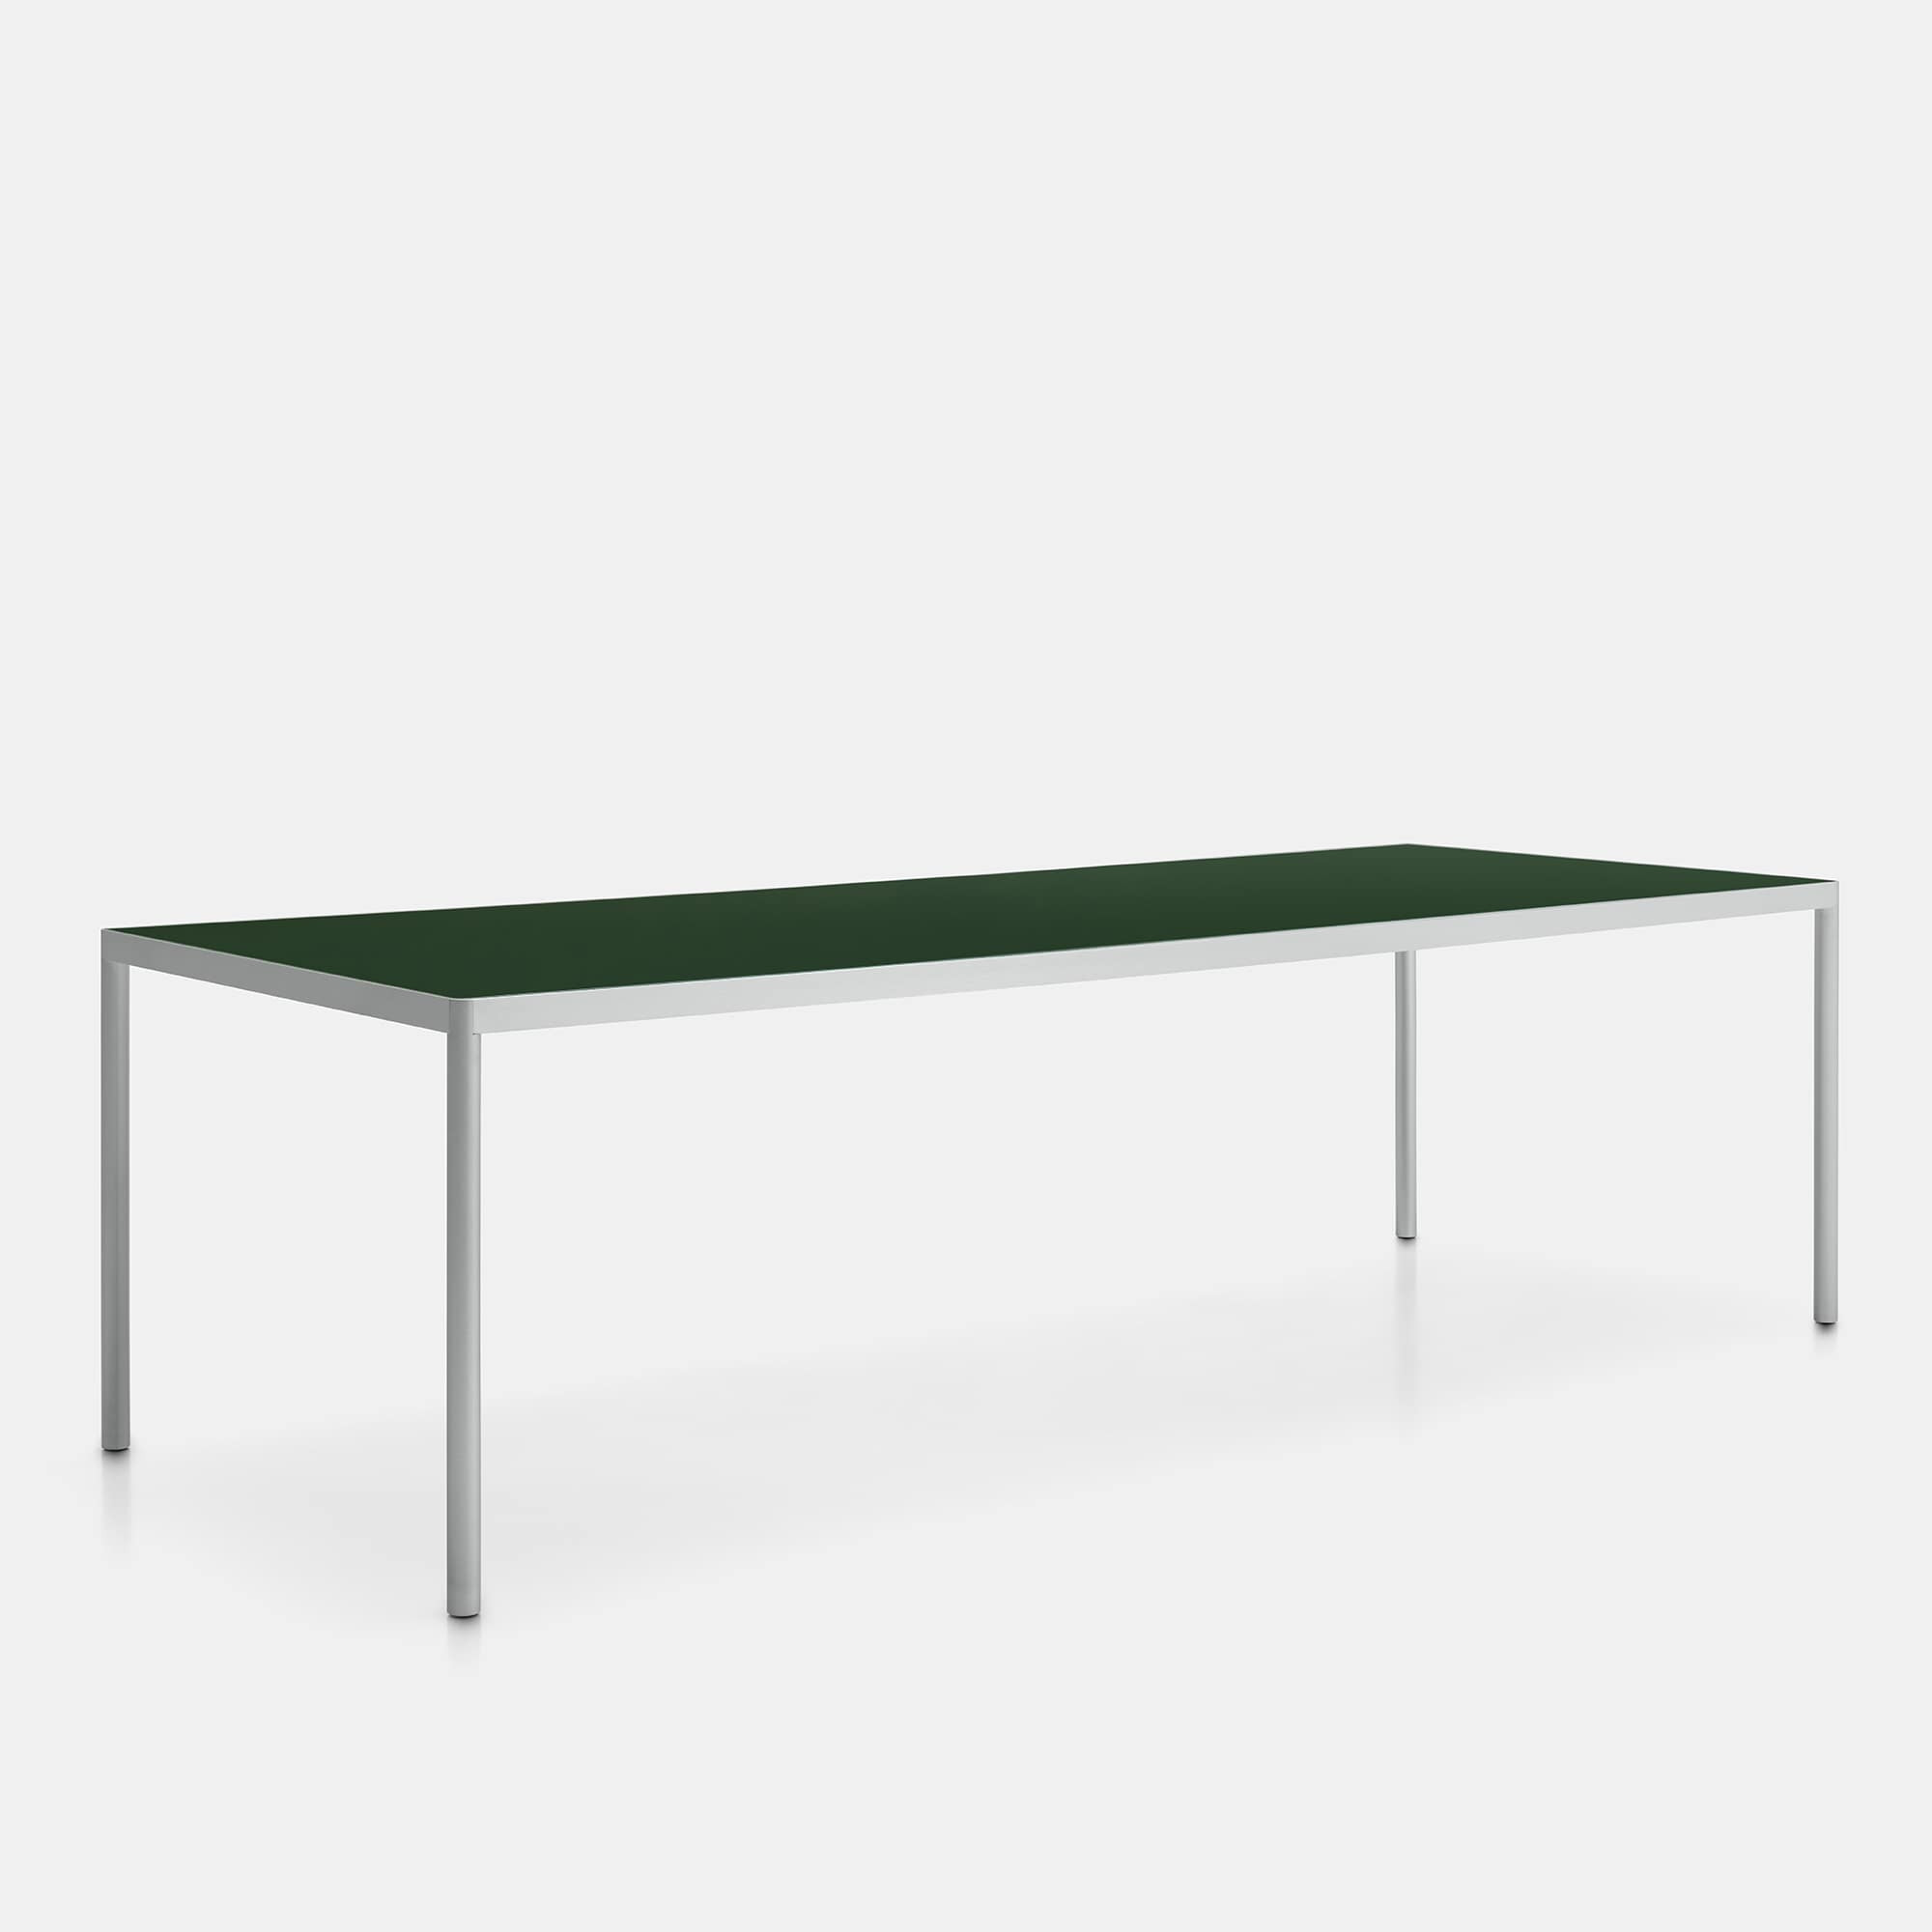 Offset Indoor / Outdoor Table ☞ Use: Indoor ☞ Structure: Brushed Anodised Aluminium X137 ☞ Top: White Back-Painted Glass X139